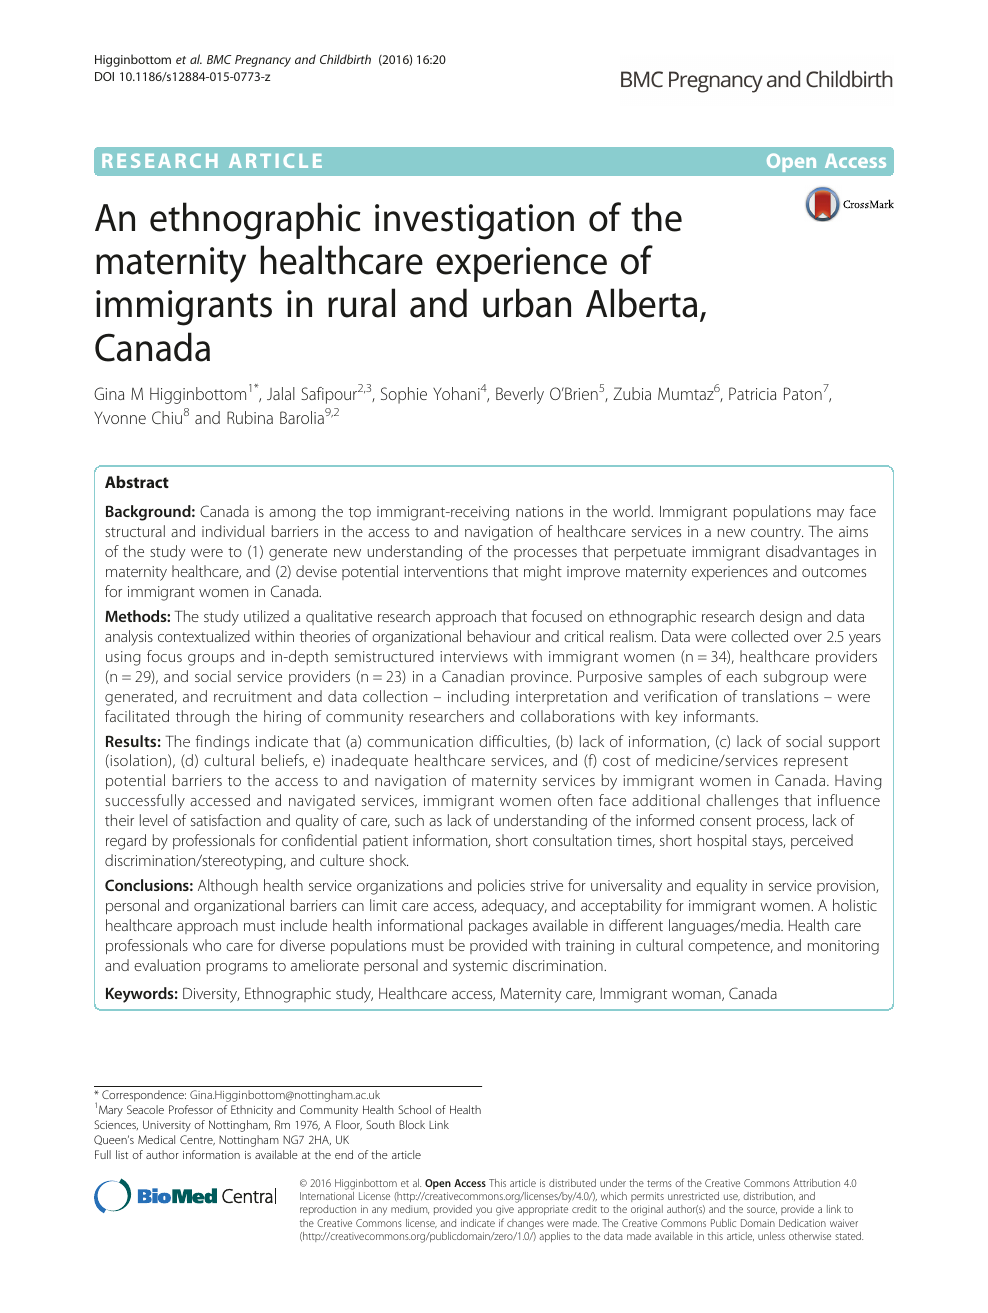 An ethnographic investigation of the maternity healthcare experience of immigrants in rural and urban Alberta, Canada